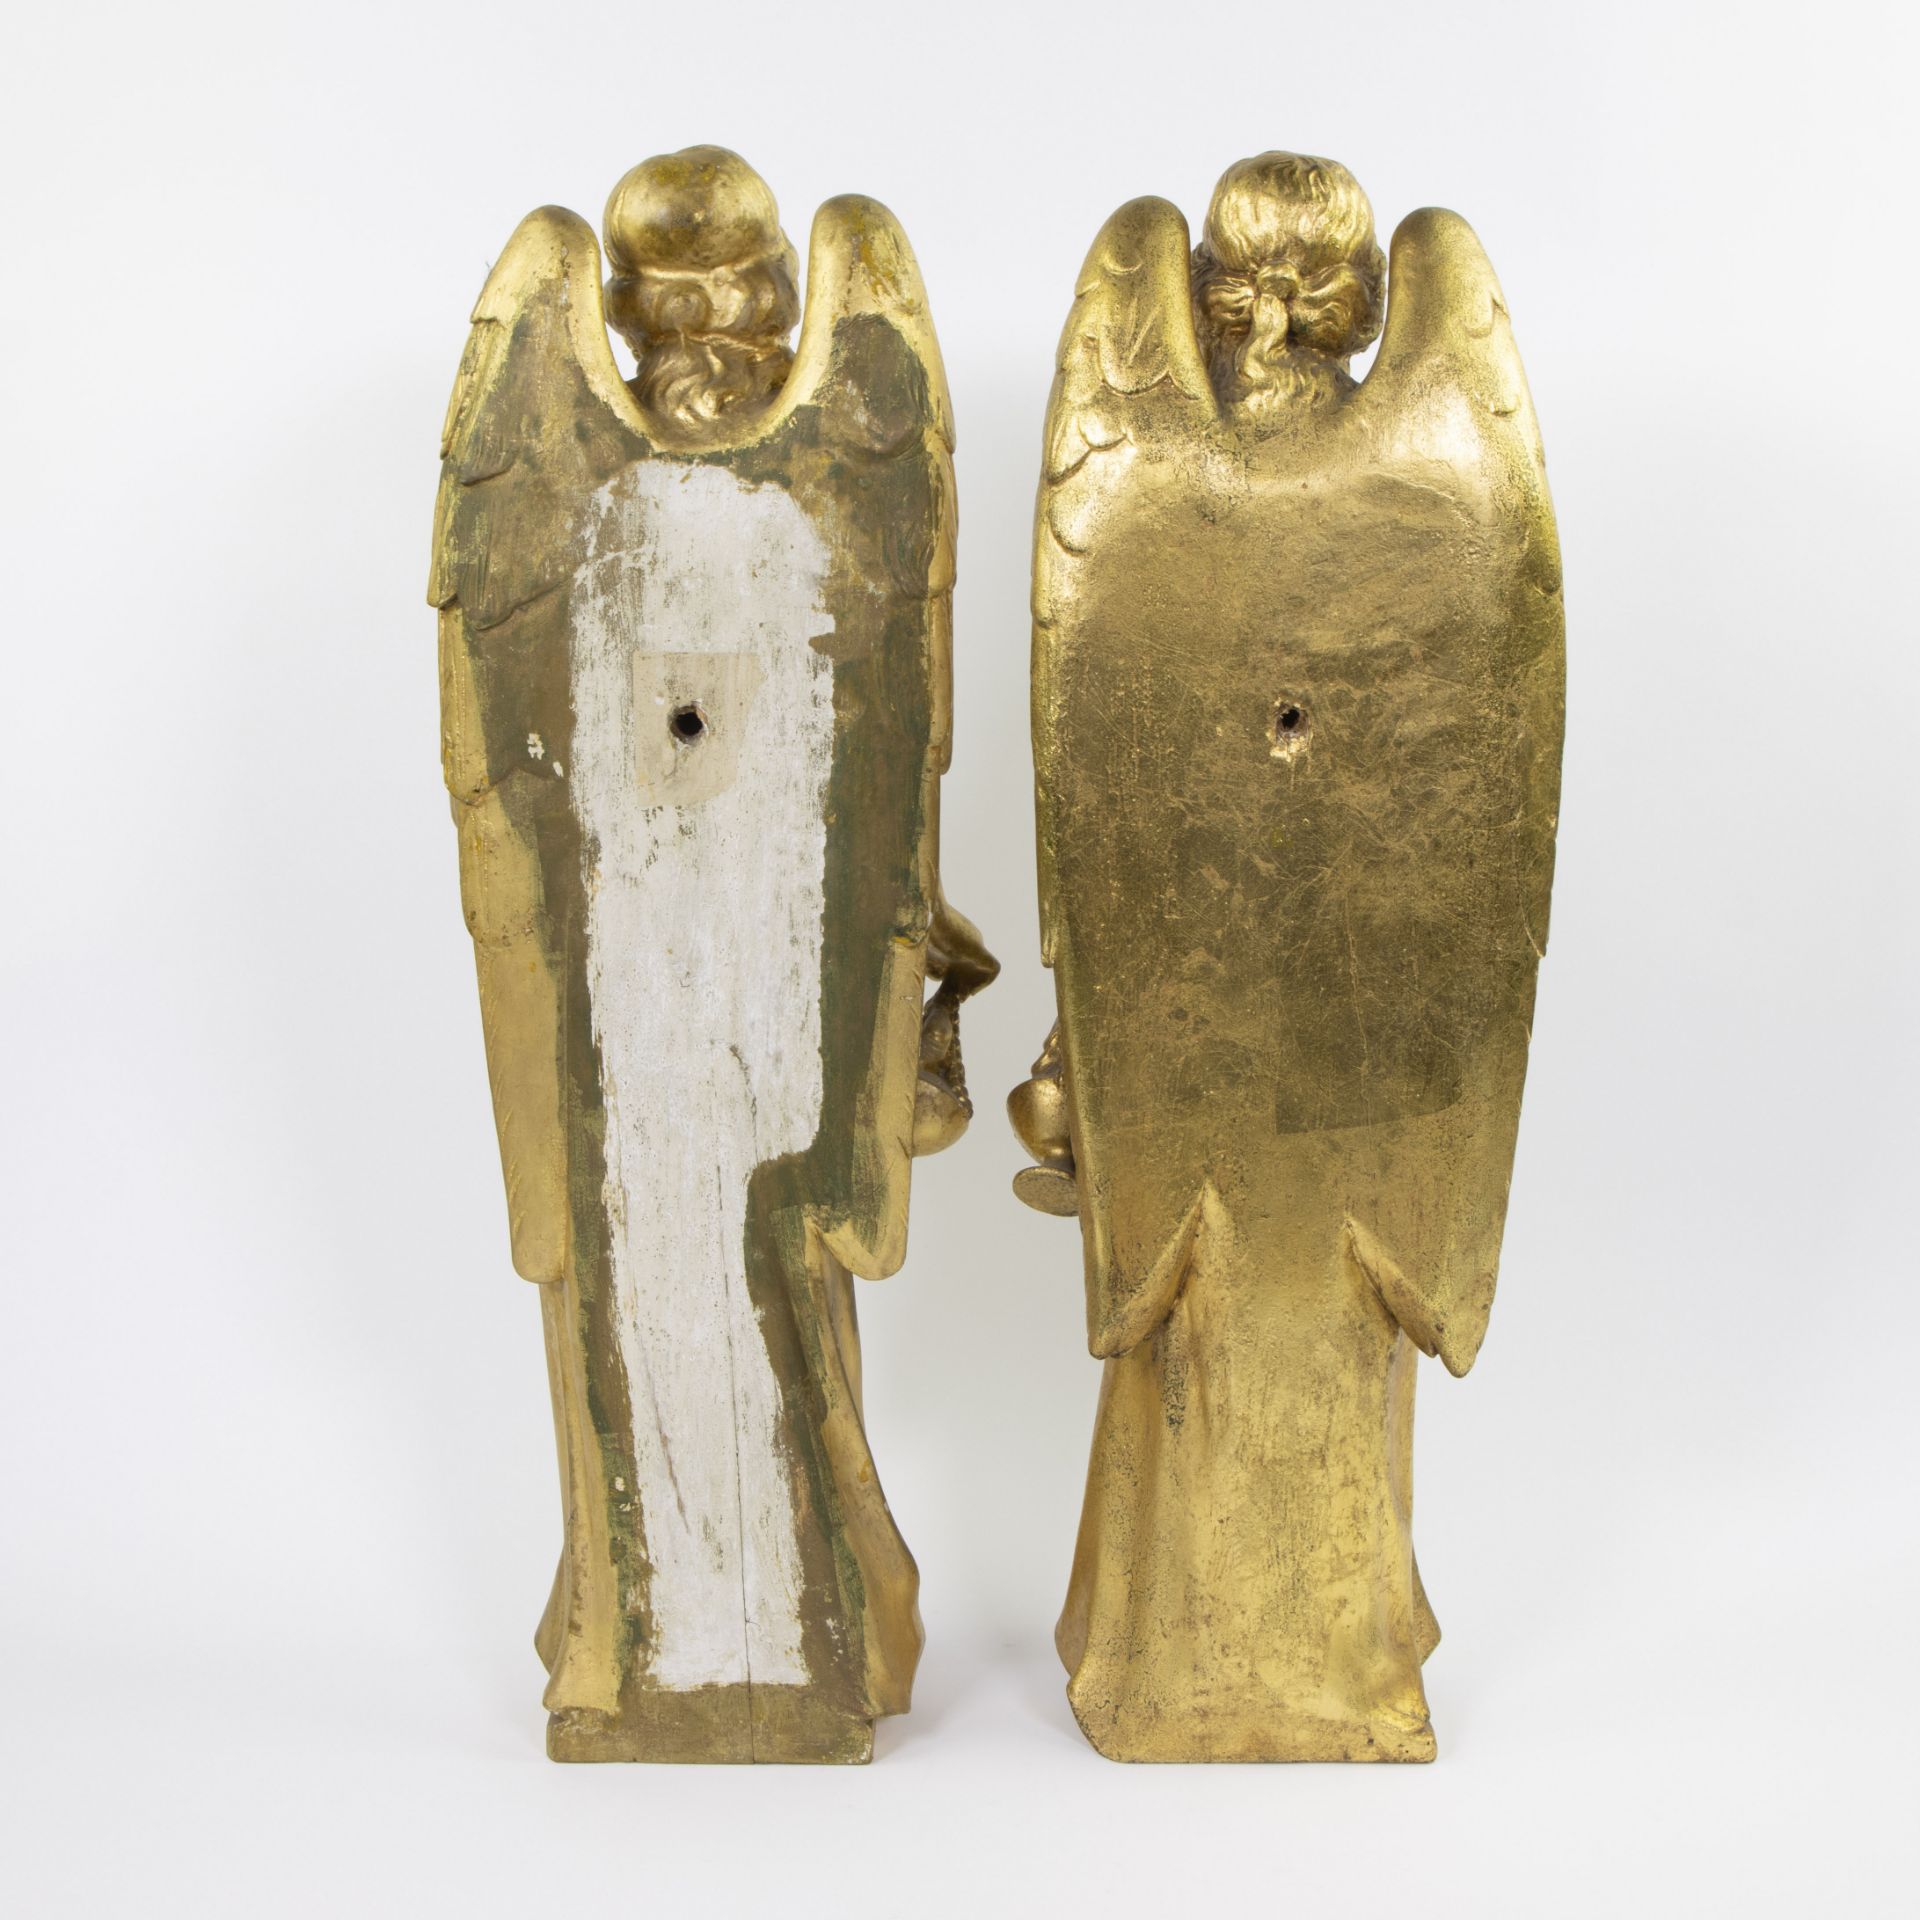 Pair of neo-gothic gilded wooden angels, Flemish, 19th century - Image 3 of 4